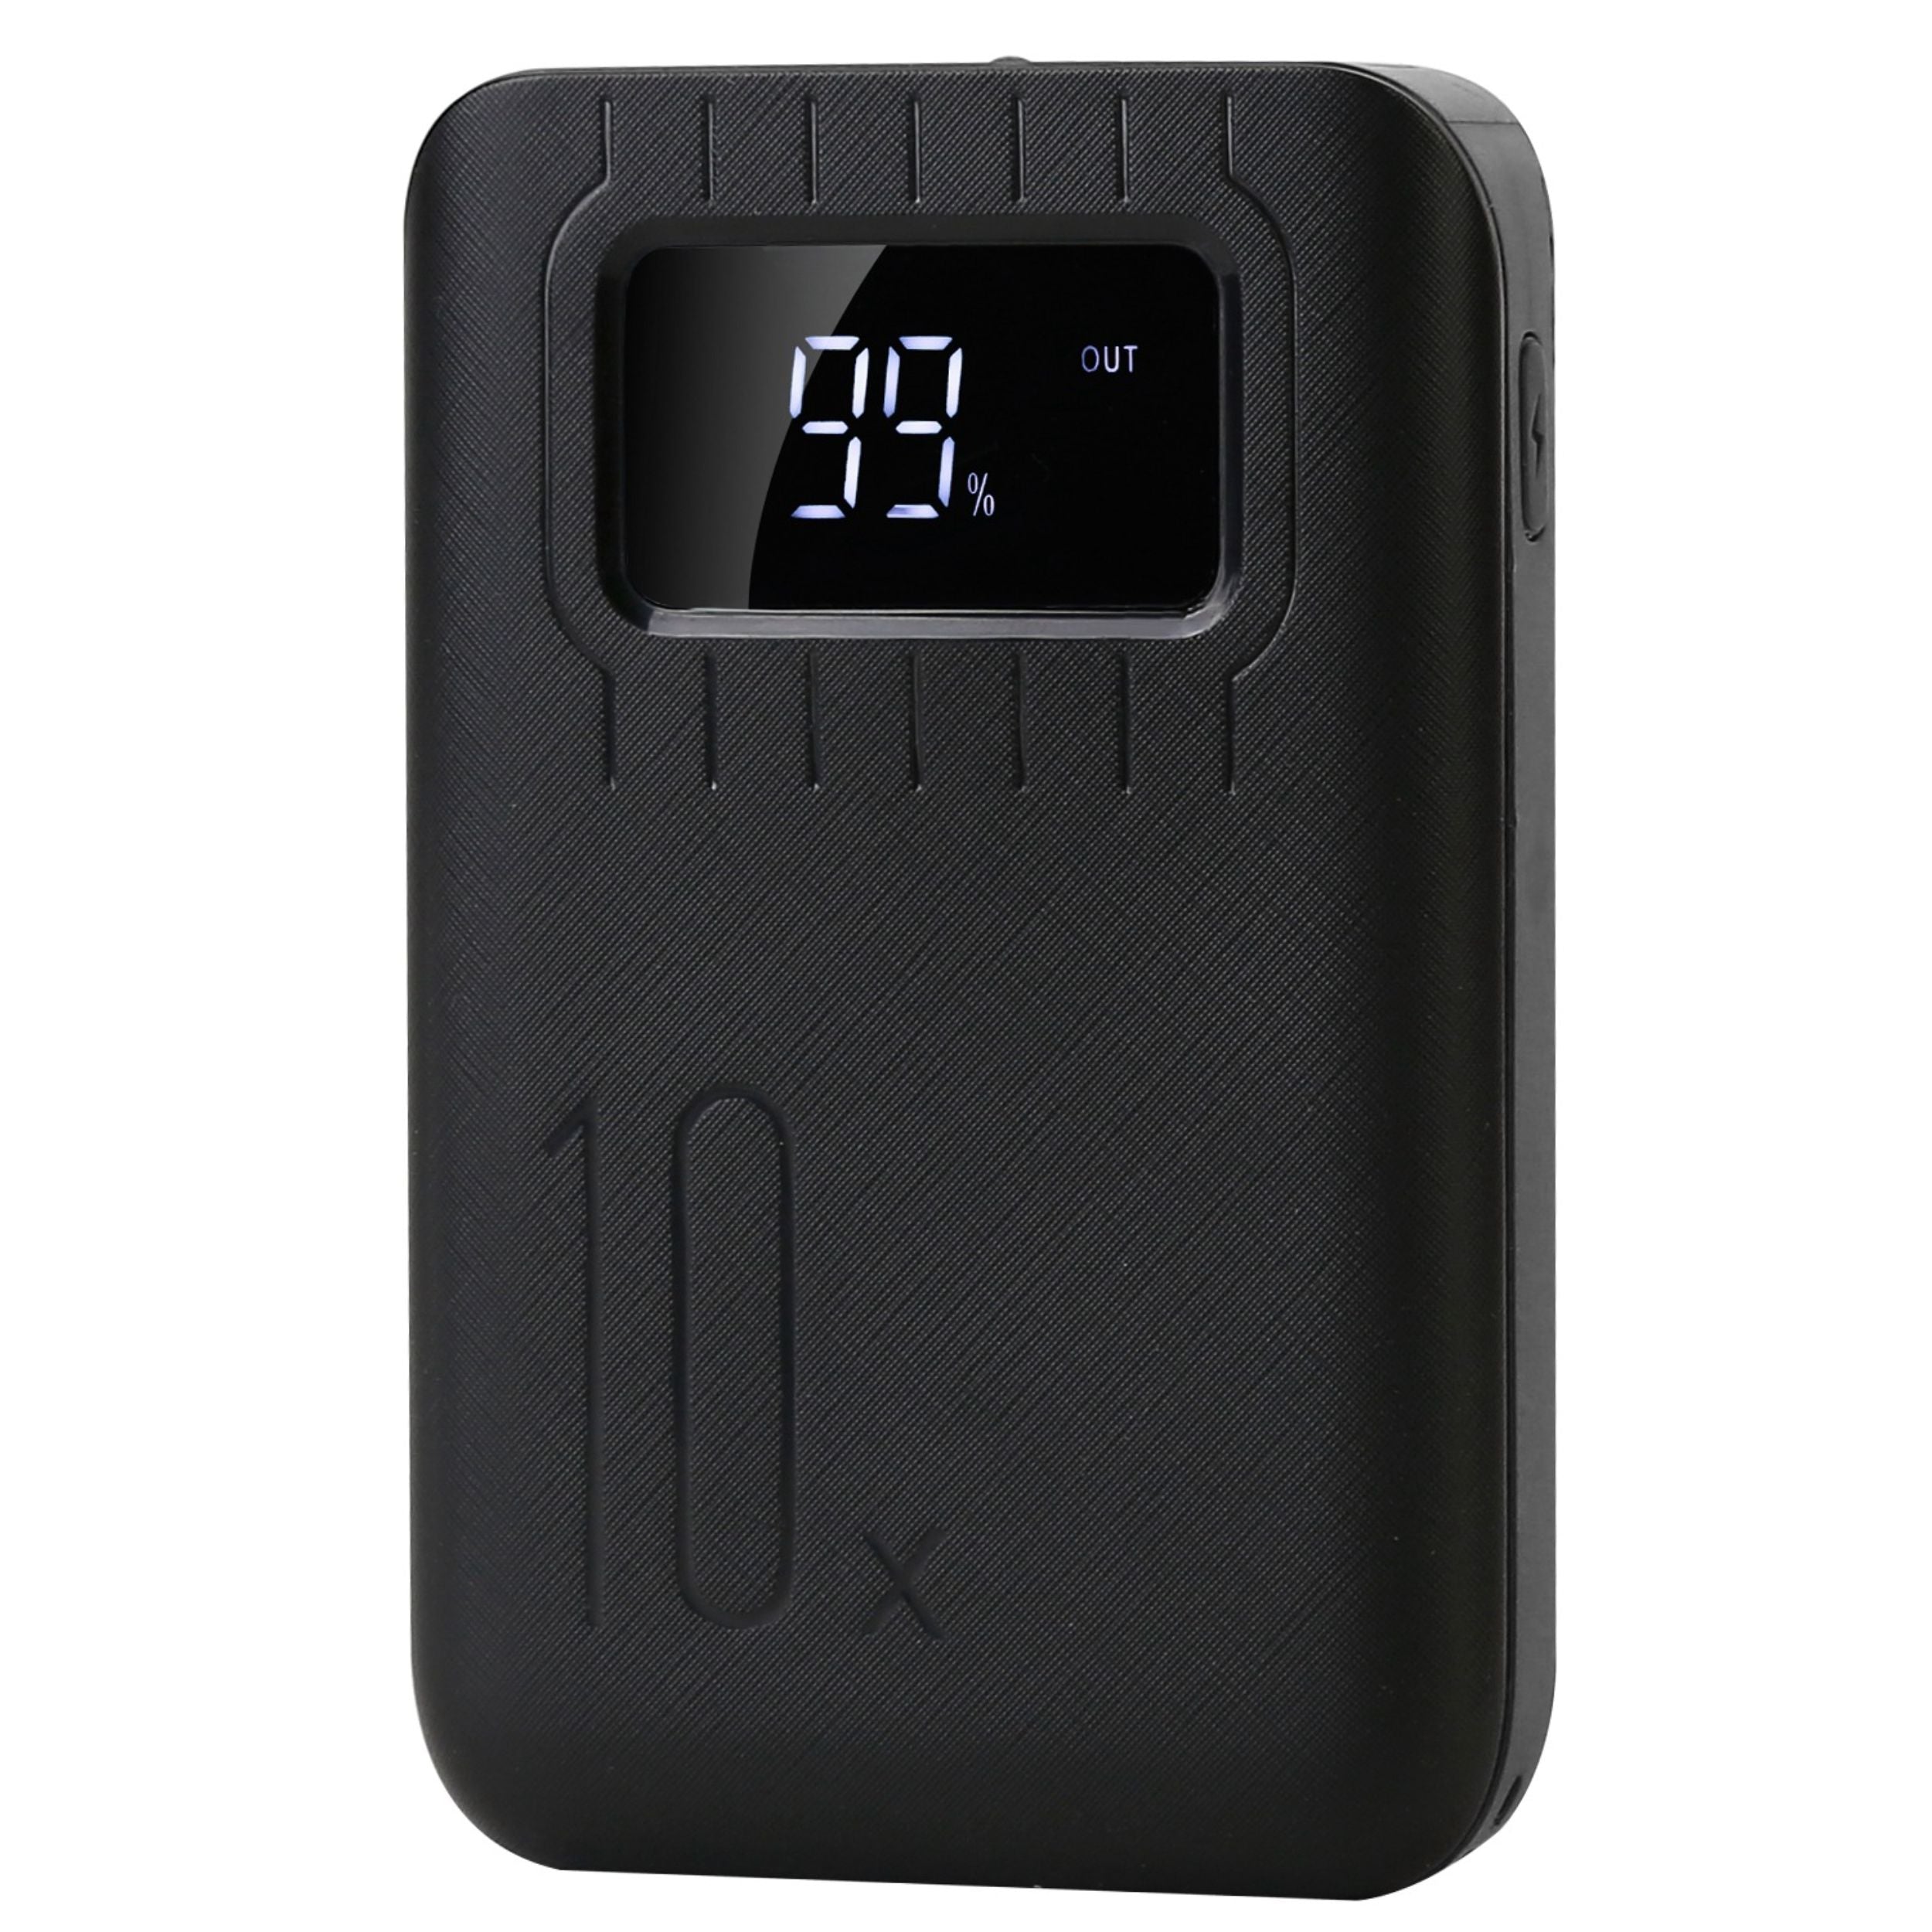 title:10,000mAh Power Bank Charger with Dual USB Ports, LCD Display & Flashlight;color:Black